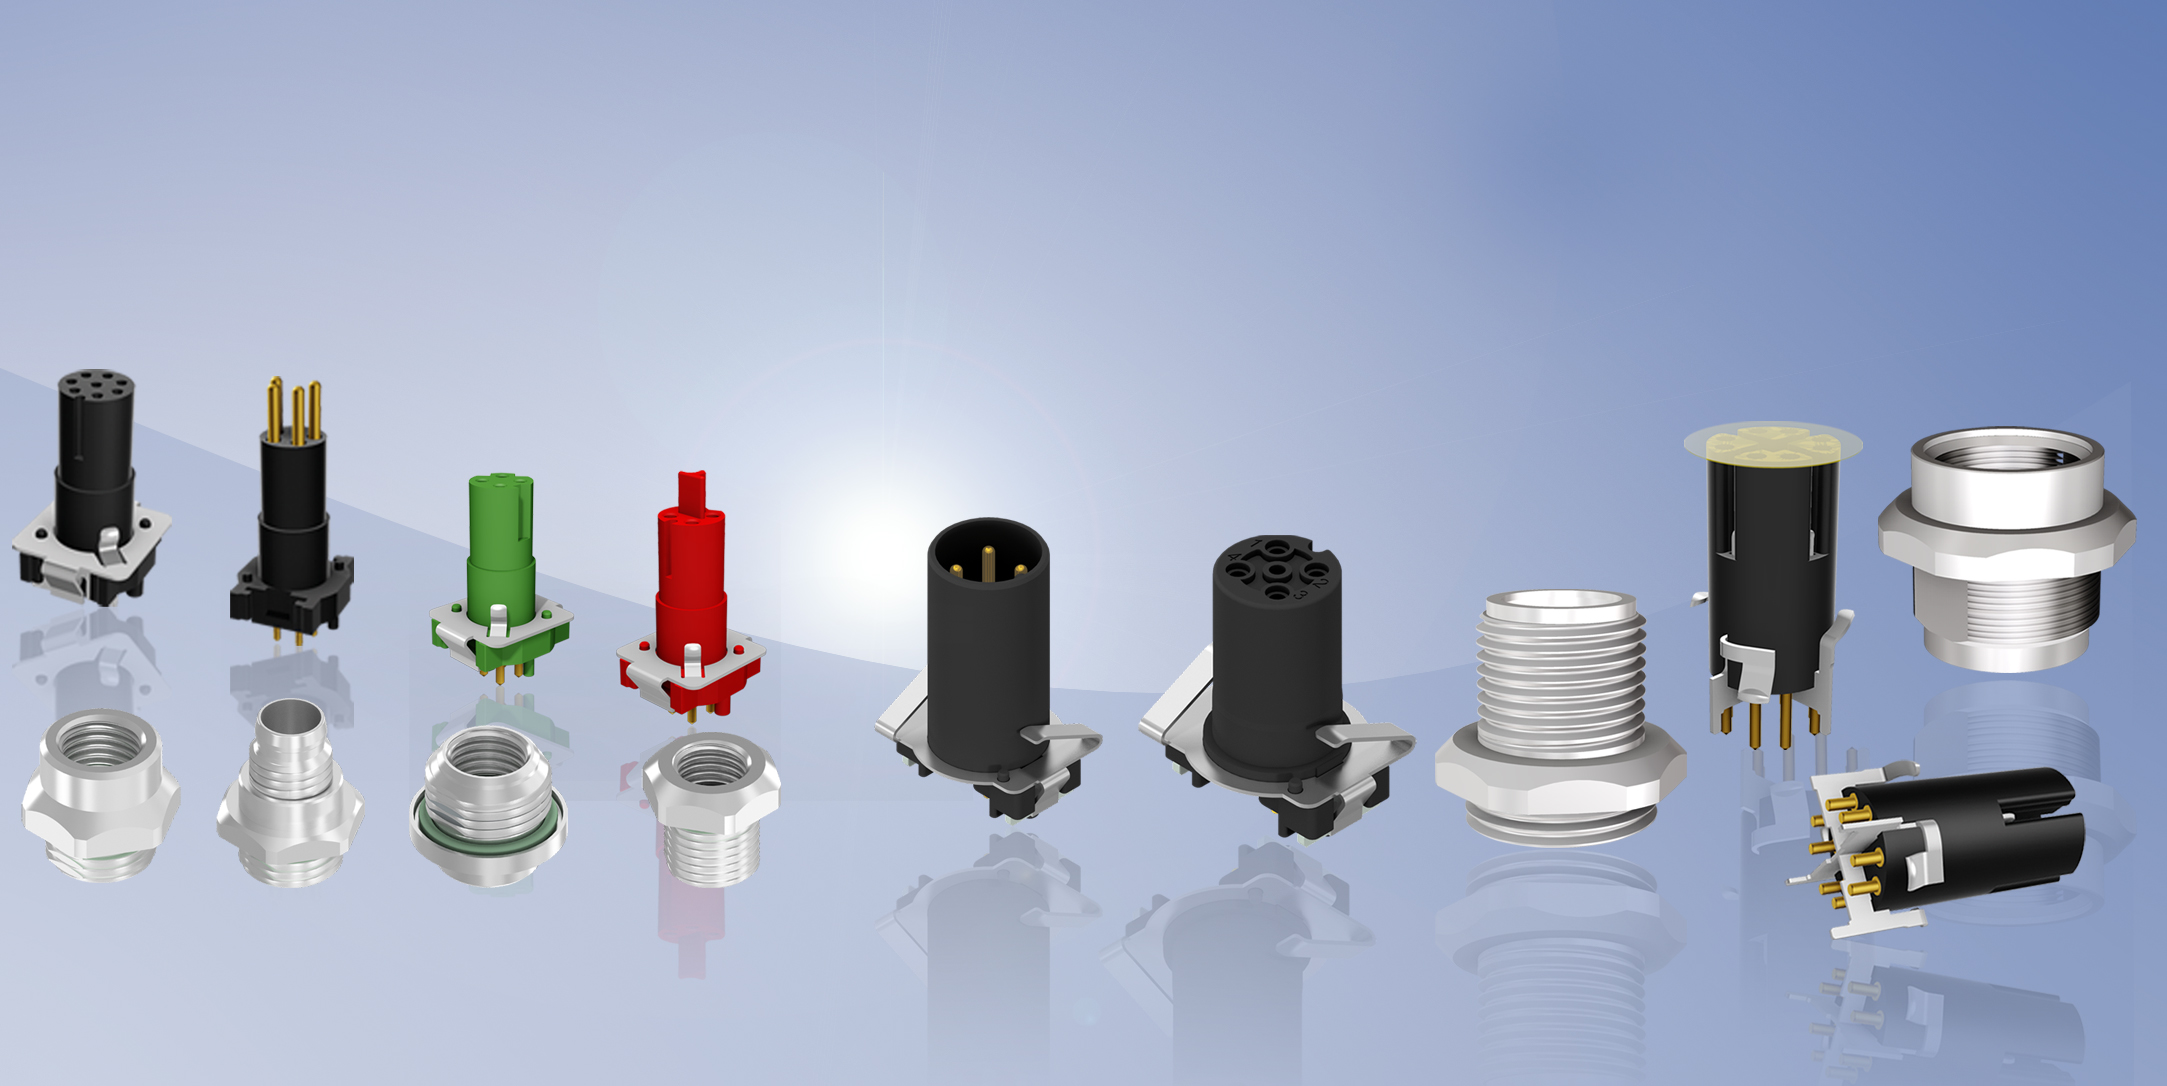 Insulating bodies and socket housing for SMT and THR mounting